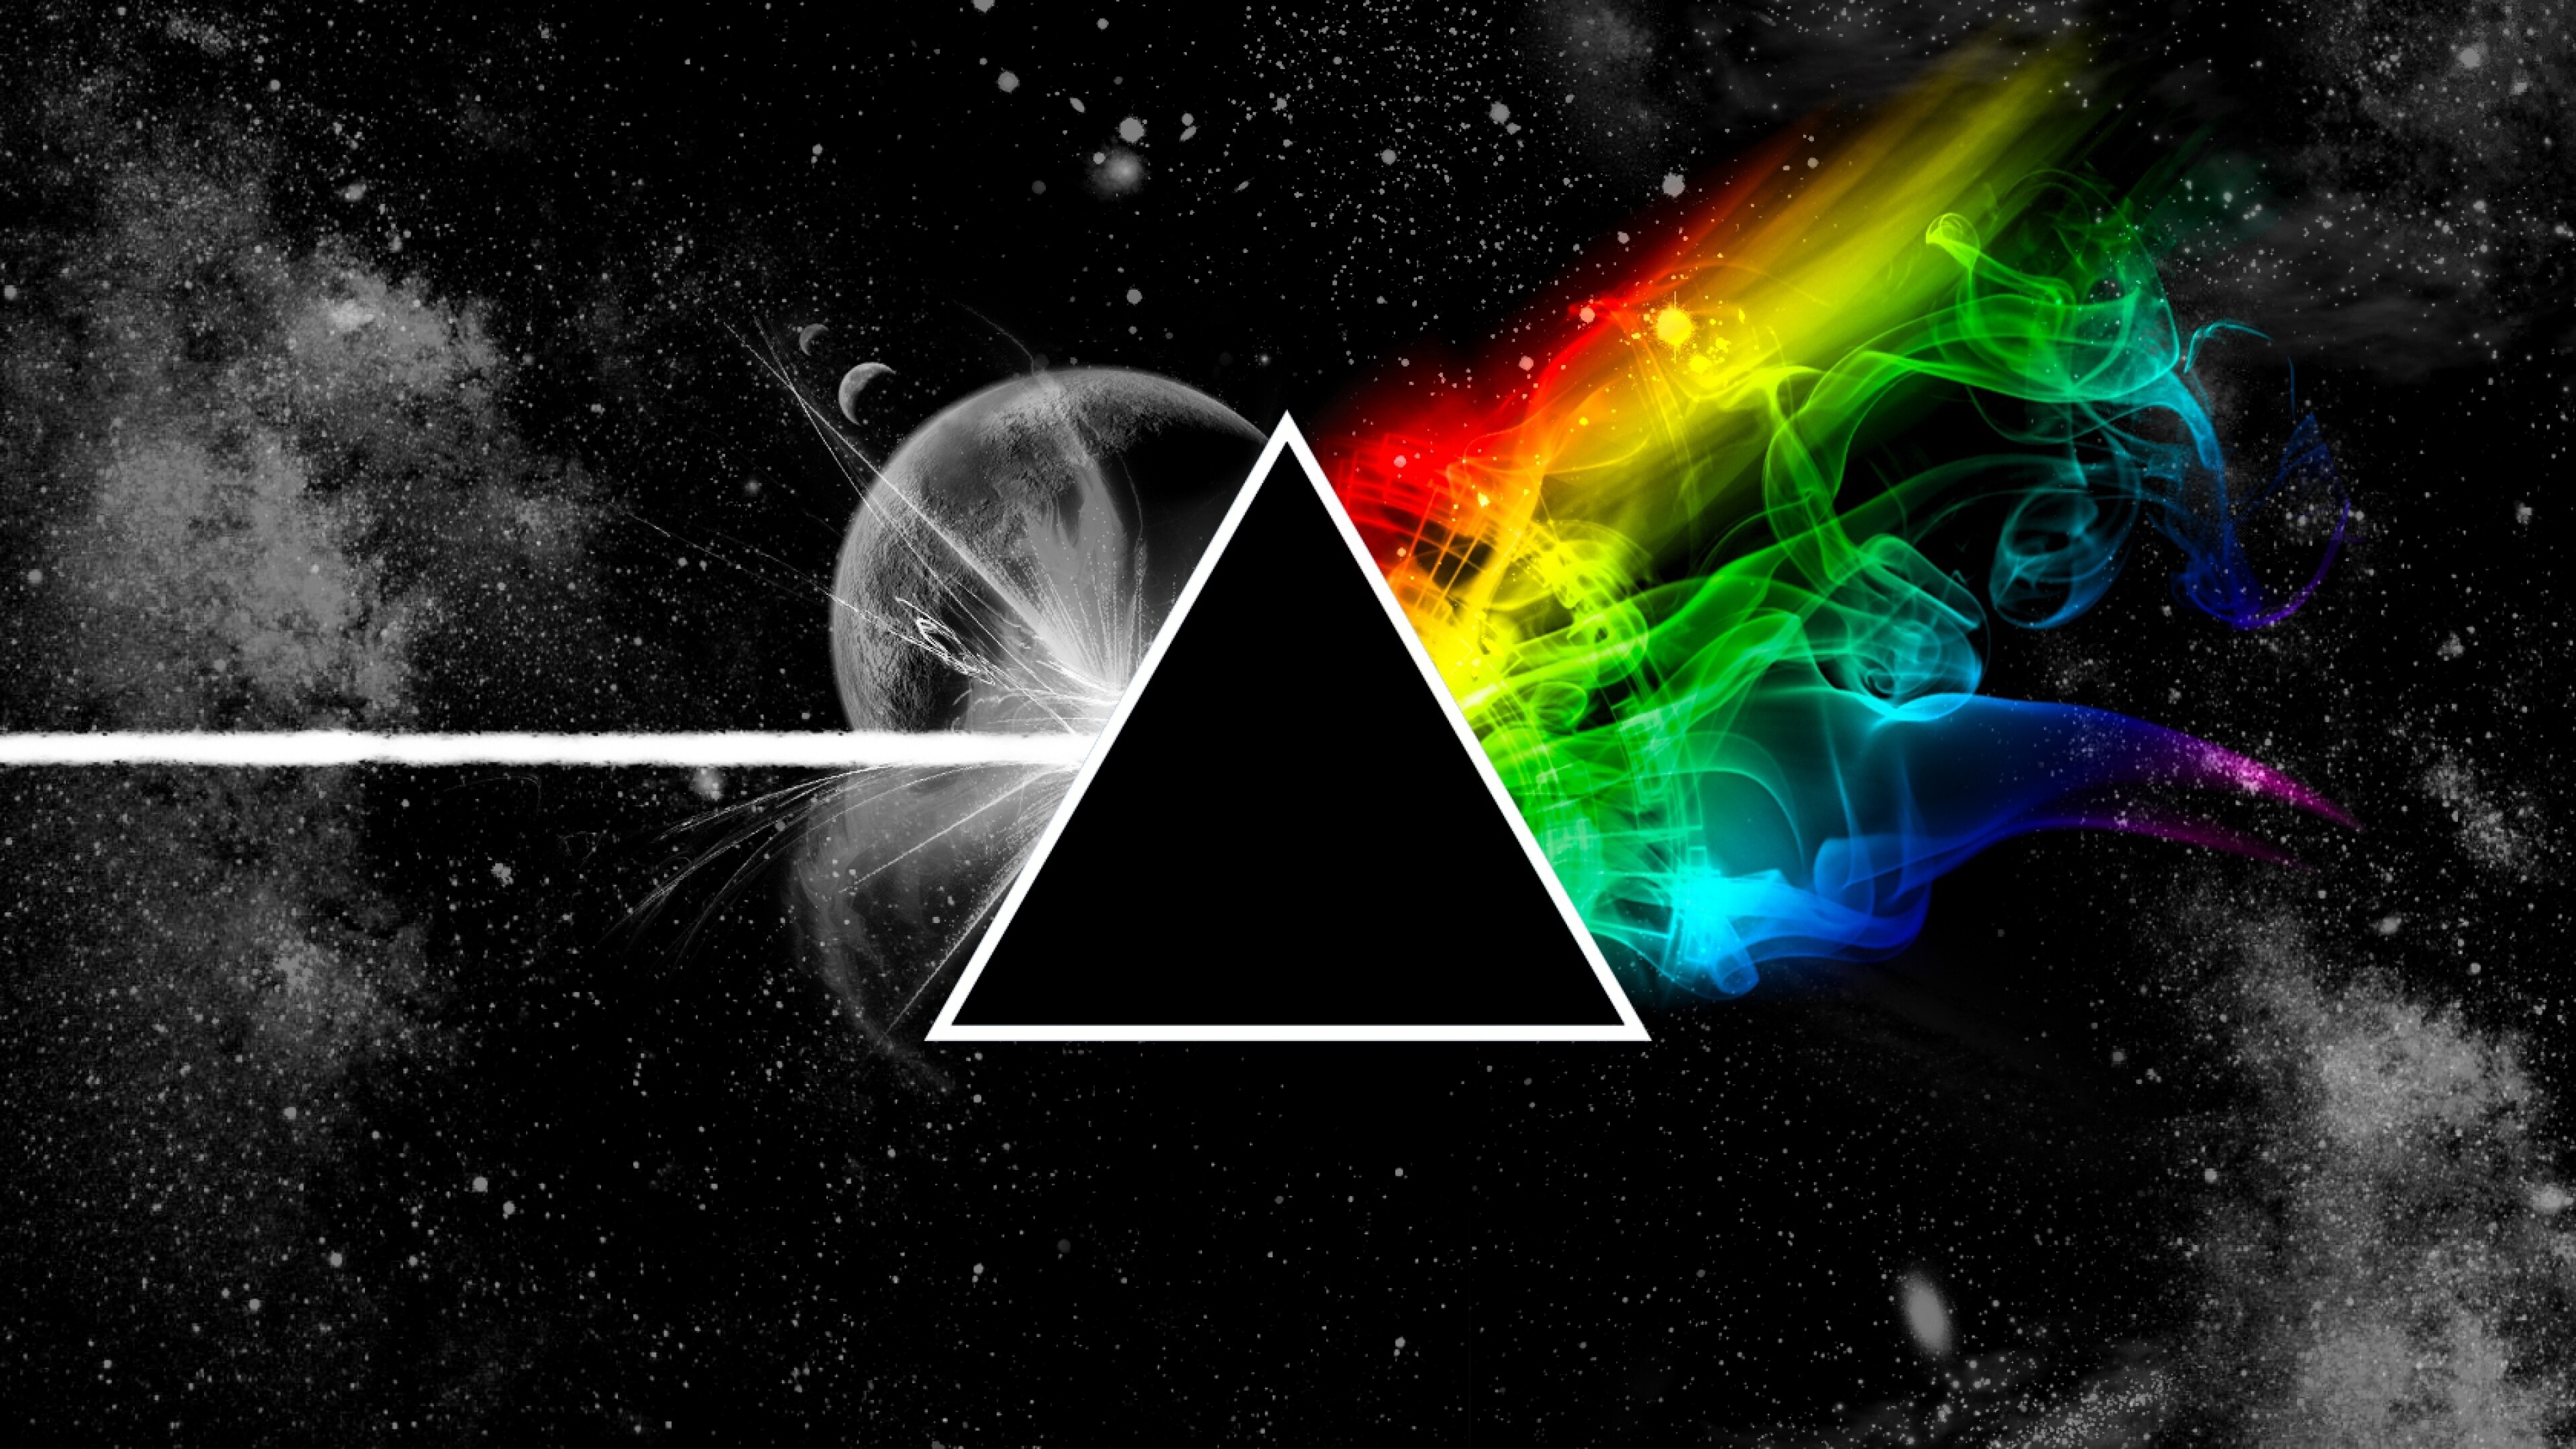 Triangle: Pink Floyd, Space, Planet, Colors, Rainbow. 3840x2160 4K Wallpaper.